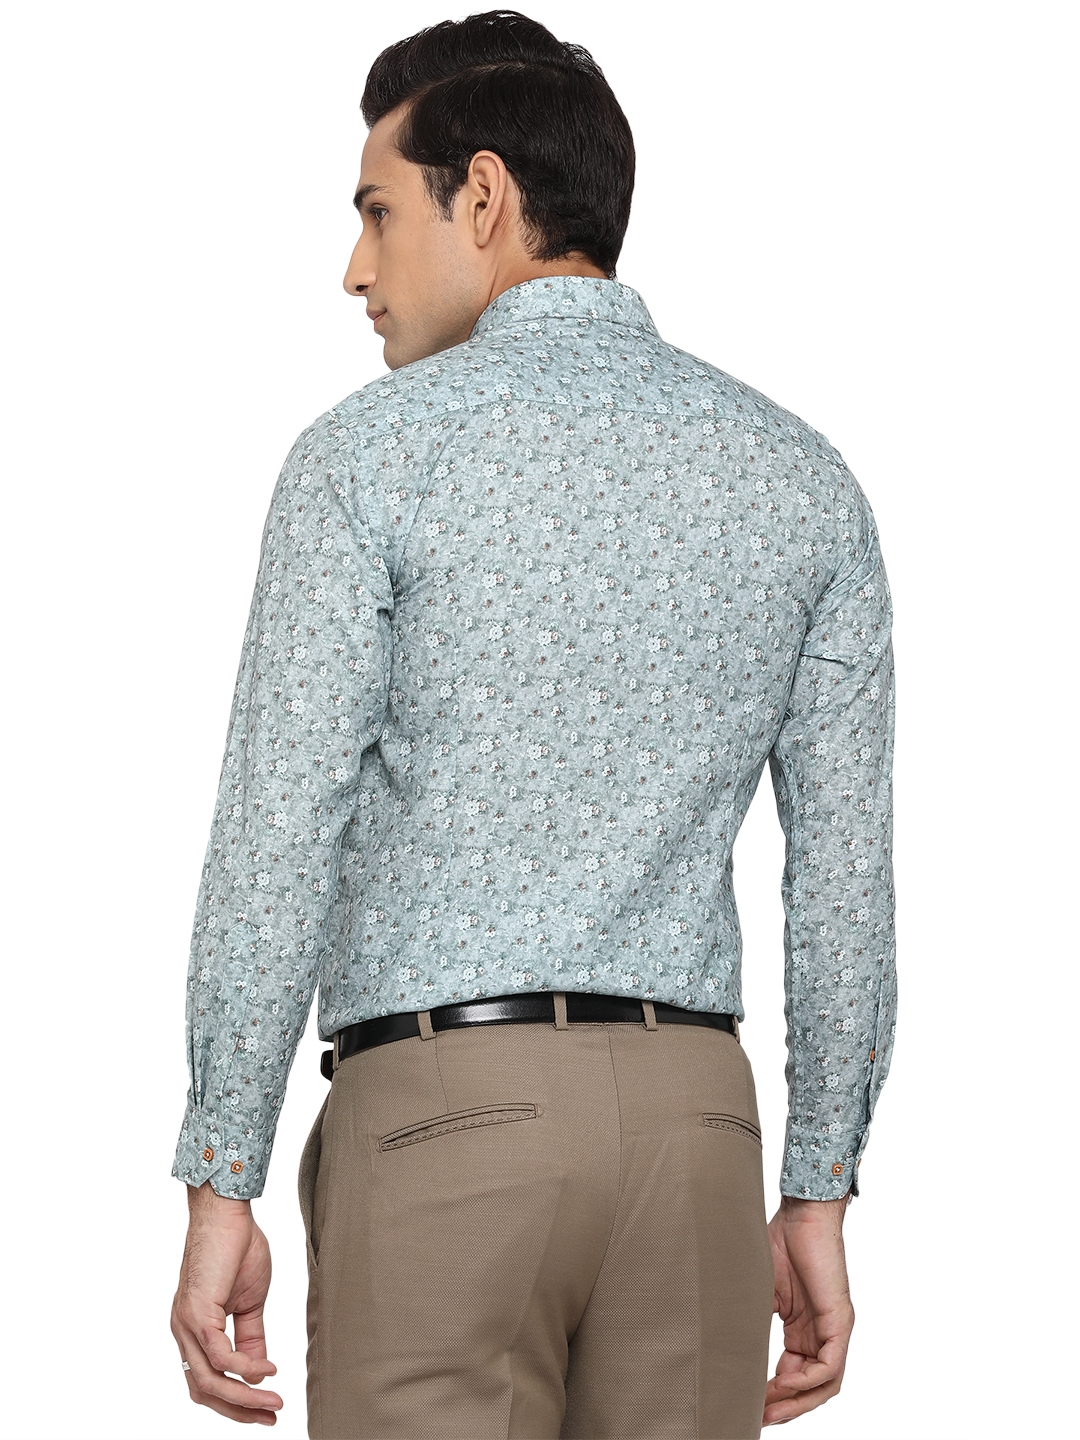 Greenfibre | Cameo Green Printed Slim Fit Party Wear Shirt | Greenfibre 2